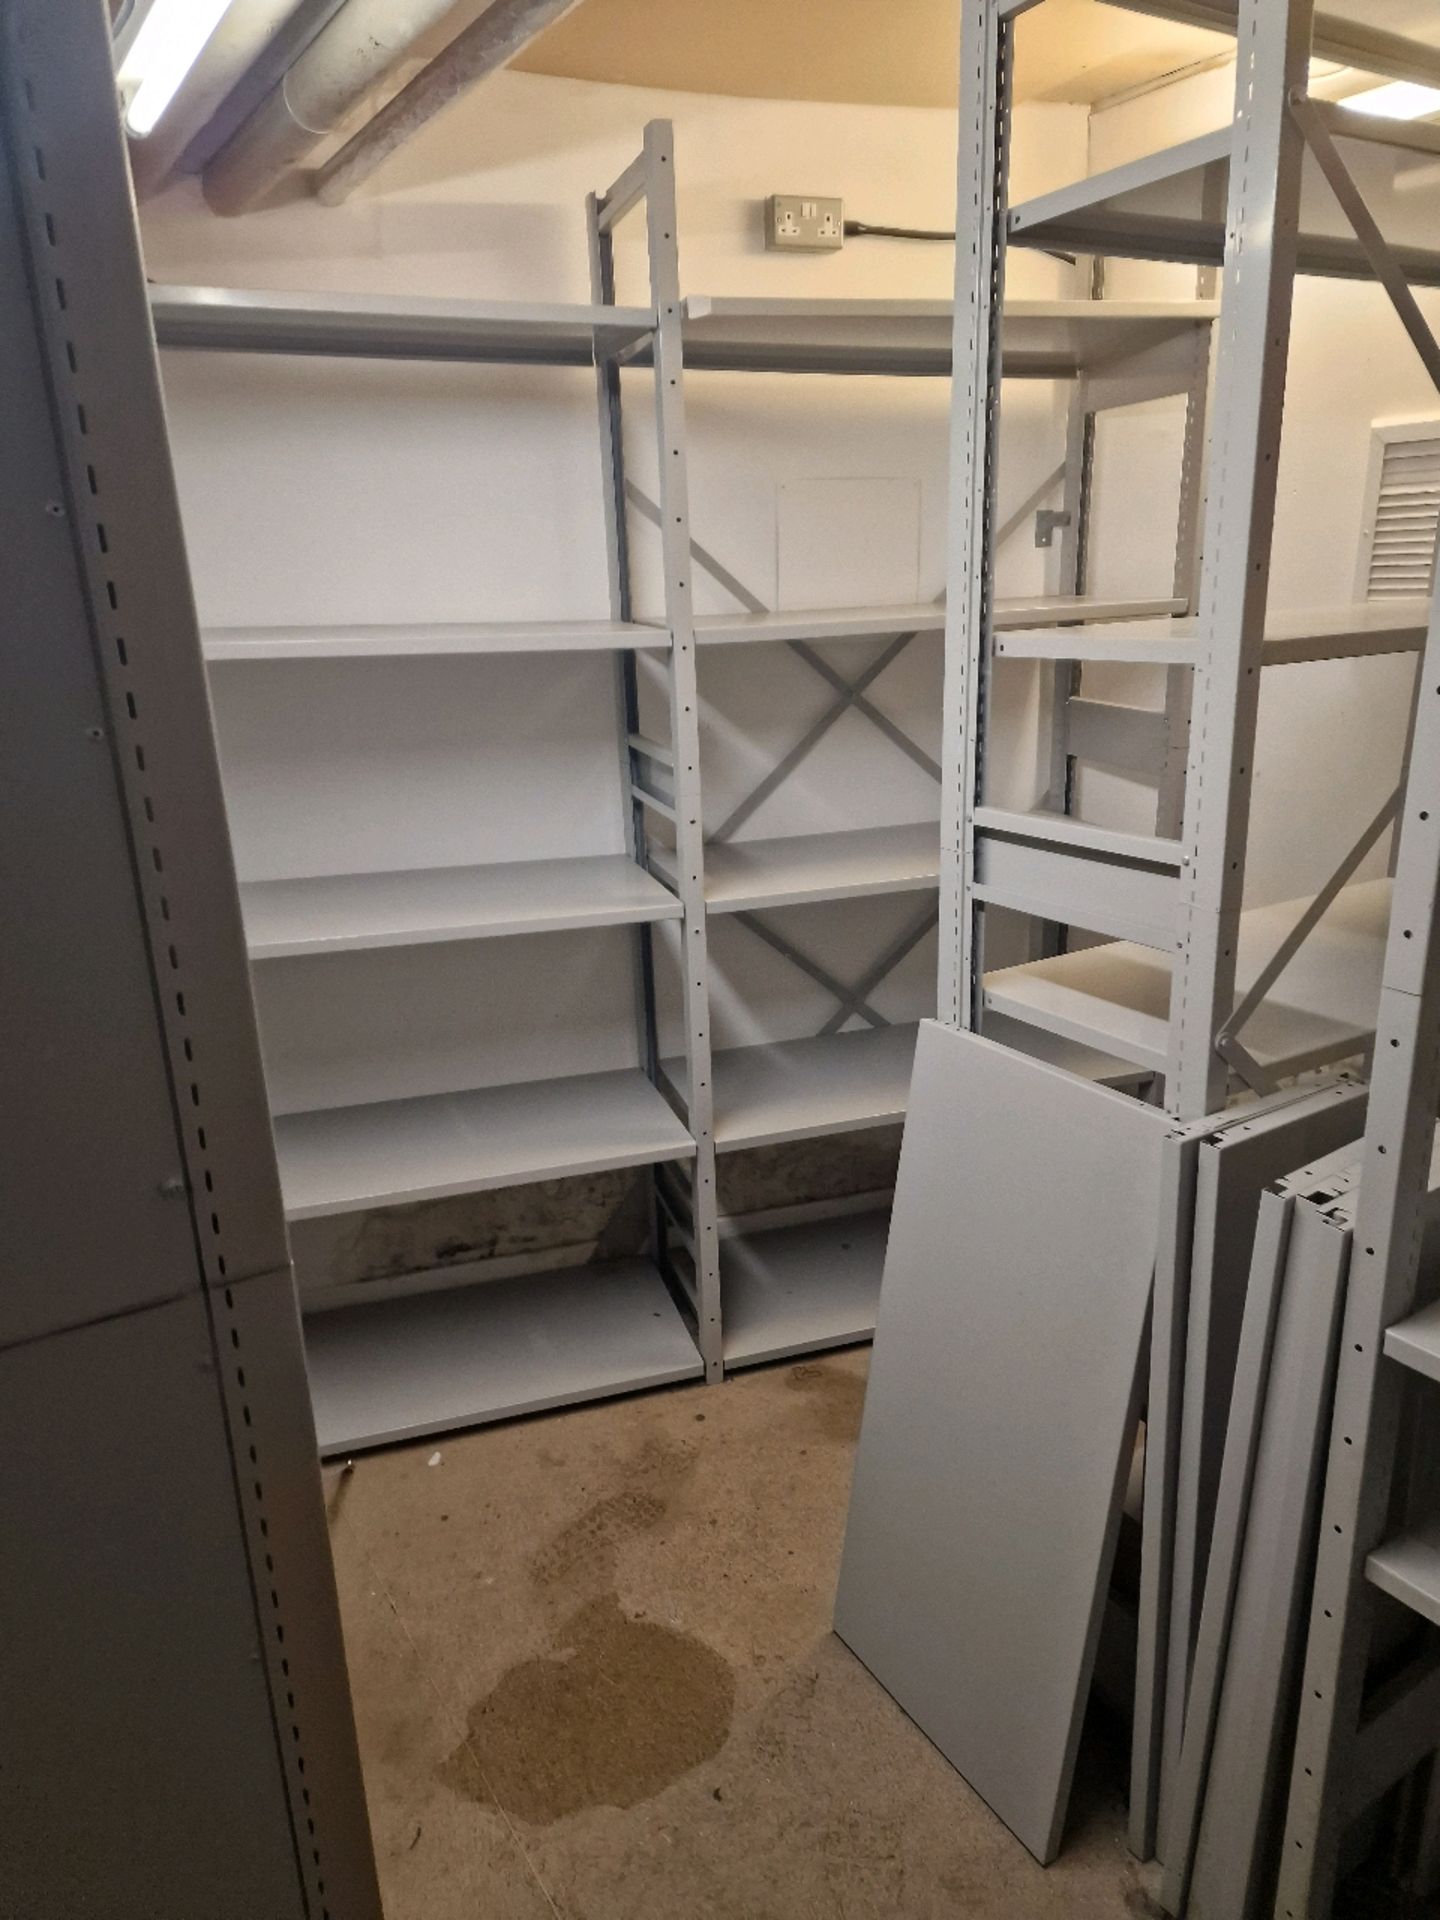 Store Room of Metal Shelving - Image 3 of 6